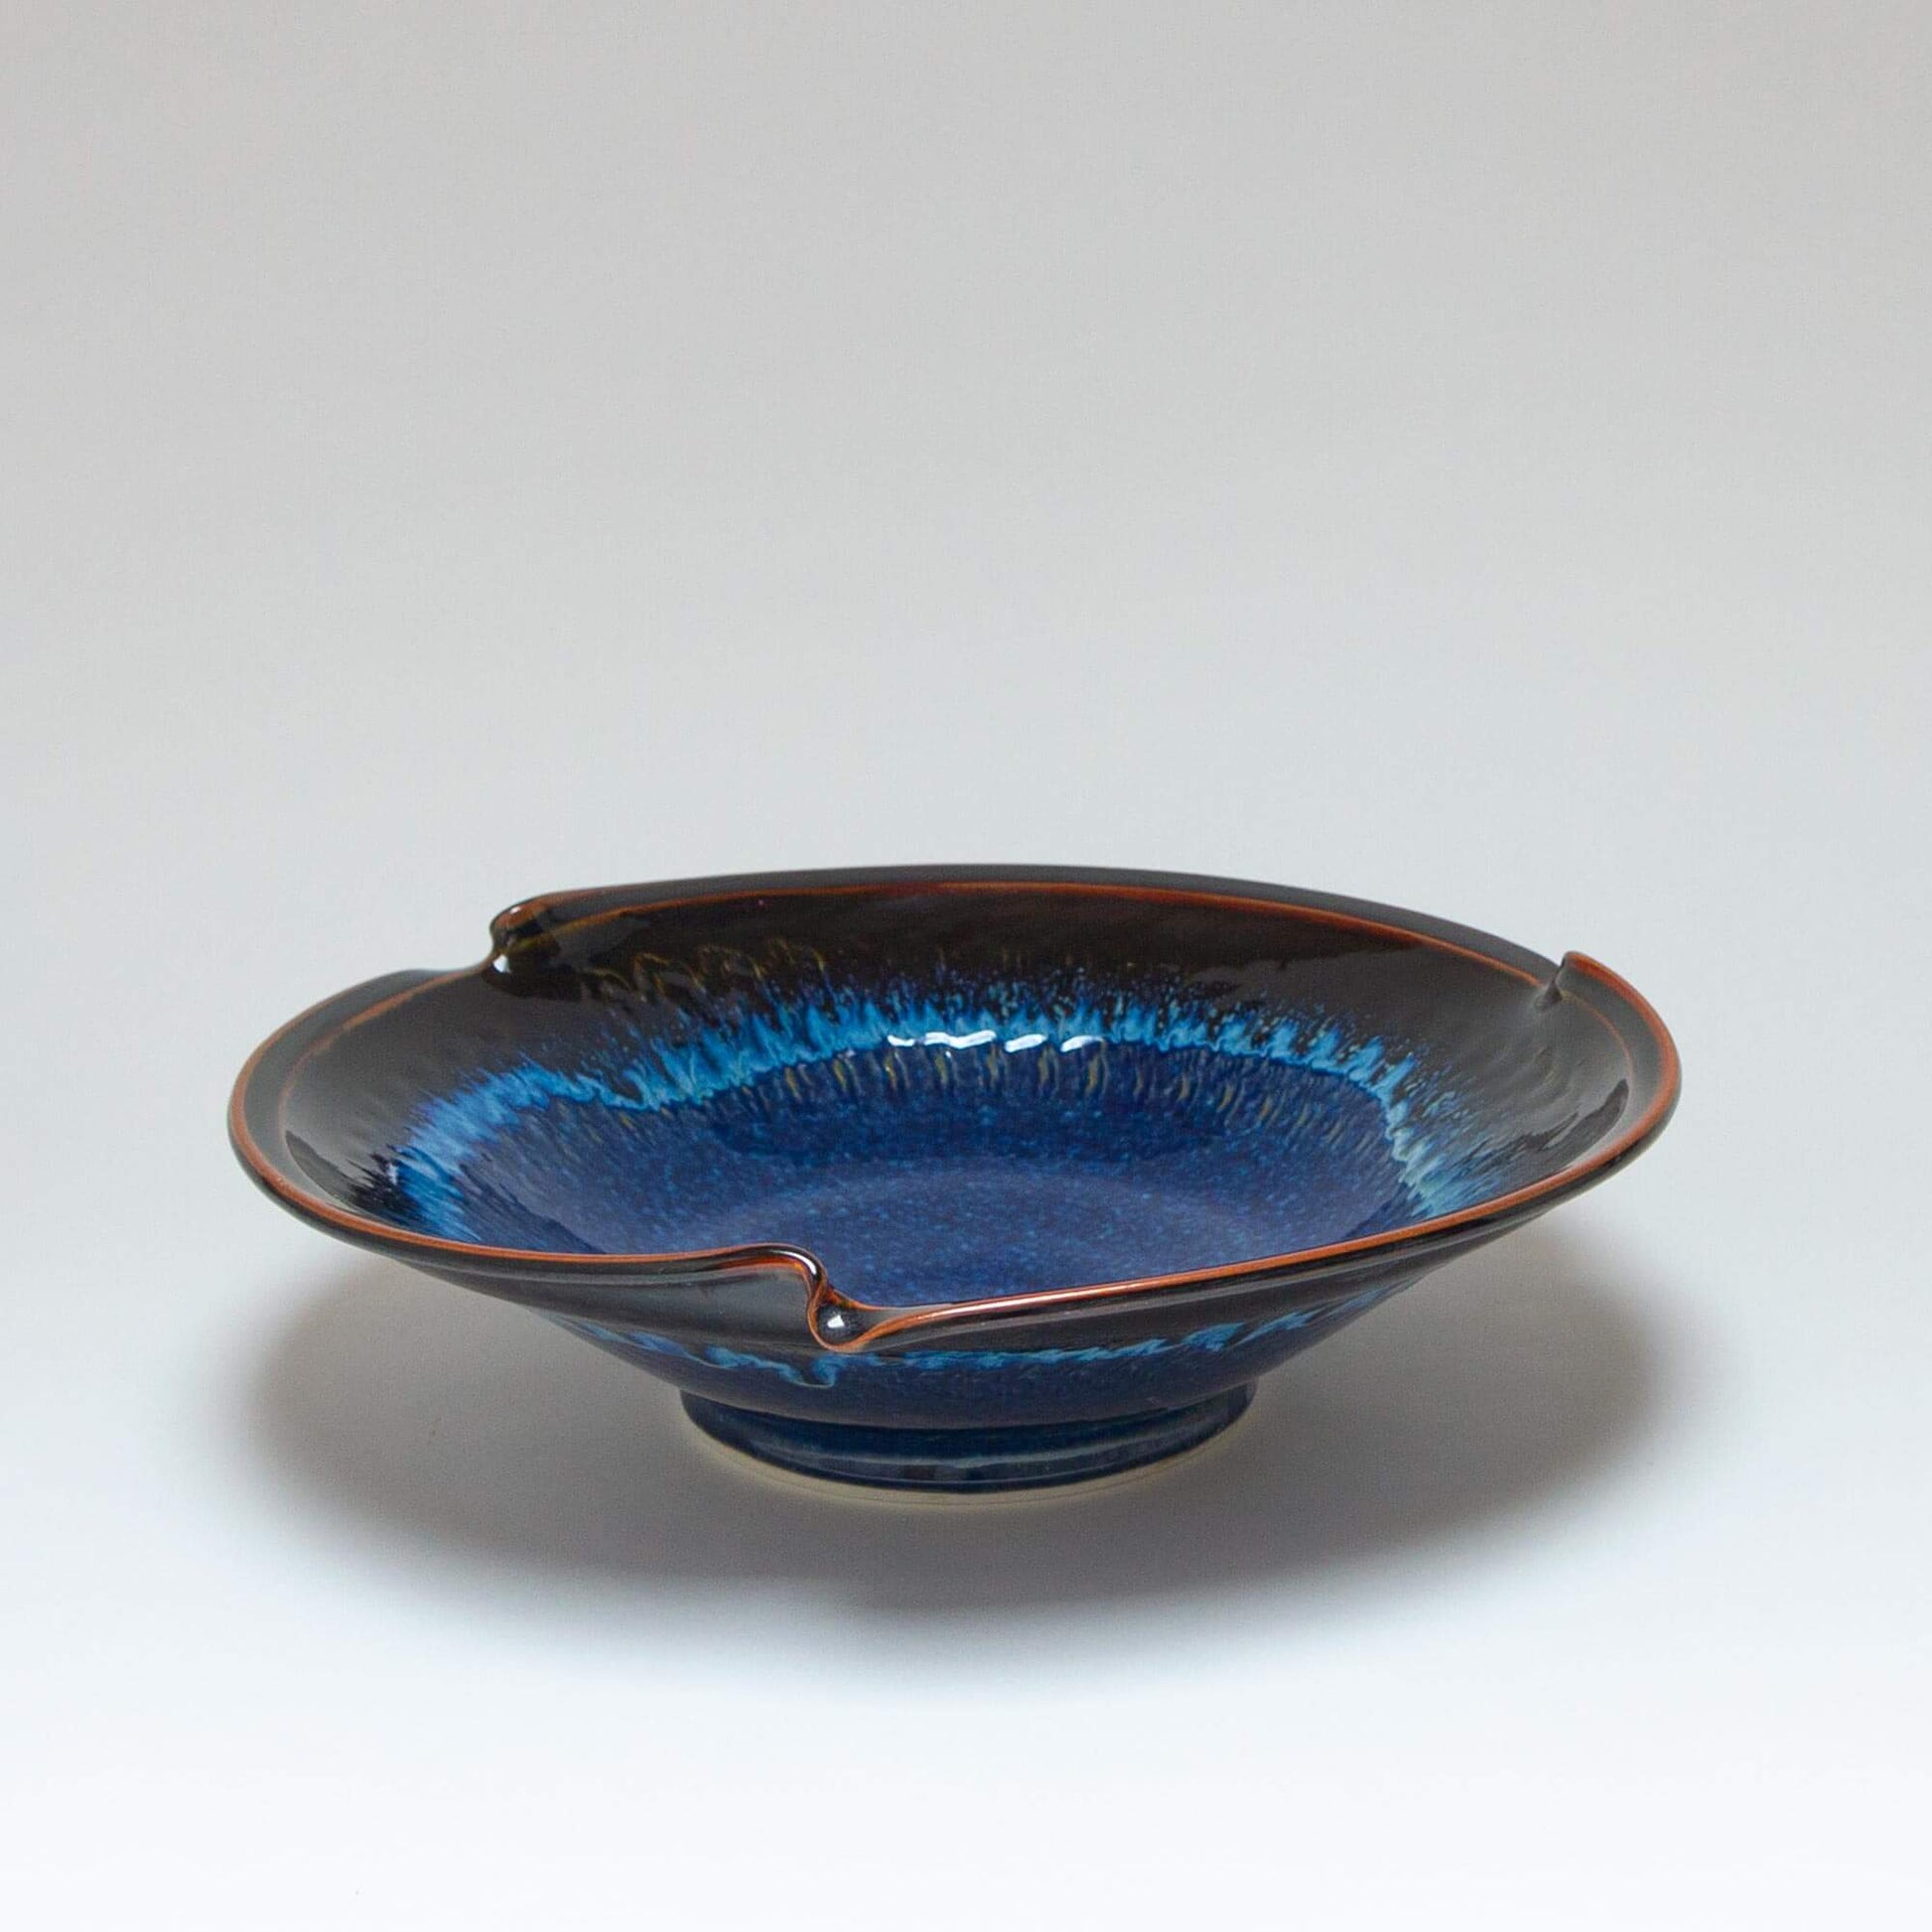 Handmade Pottery Signature Wave Bowl in Blue Hamada pattern made by Georgetown Pottery in Maine